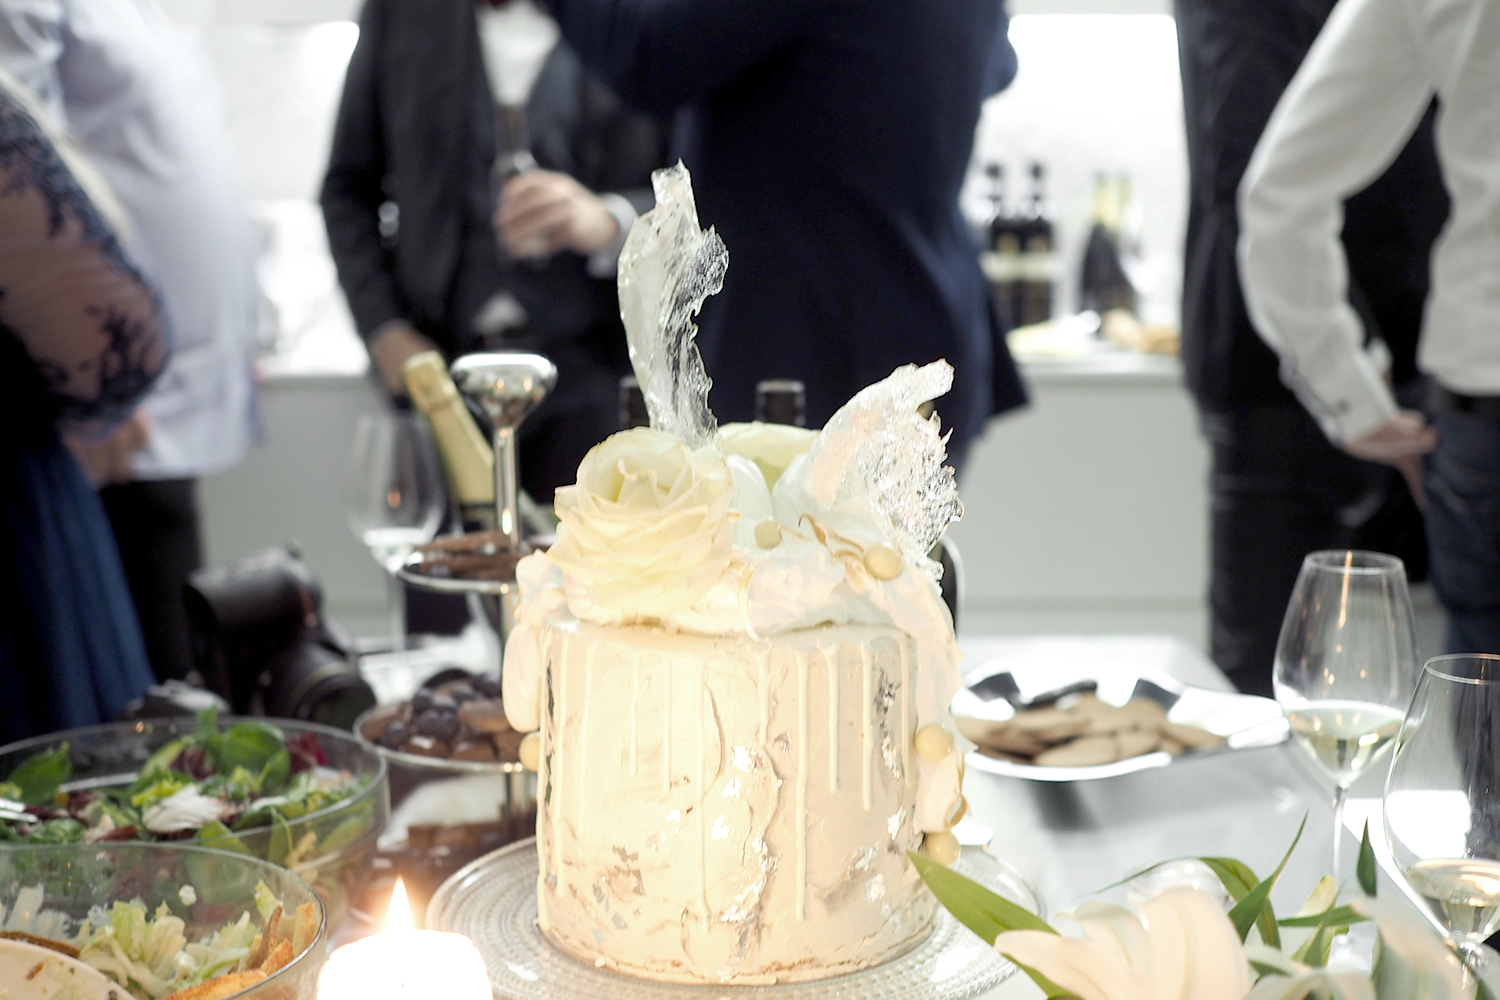 C and the city - The most stylish birthdayparty - champagne, lilies and cake! - more pics and ideas on the blog: //www.idealista.fi/charandthecity/2016/11/27/talven-tyylikkaimmat-juhlat